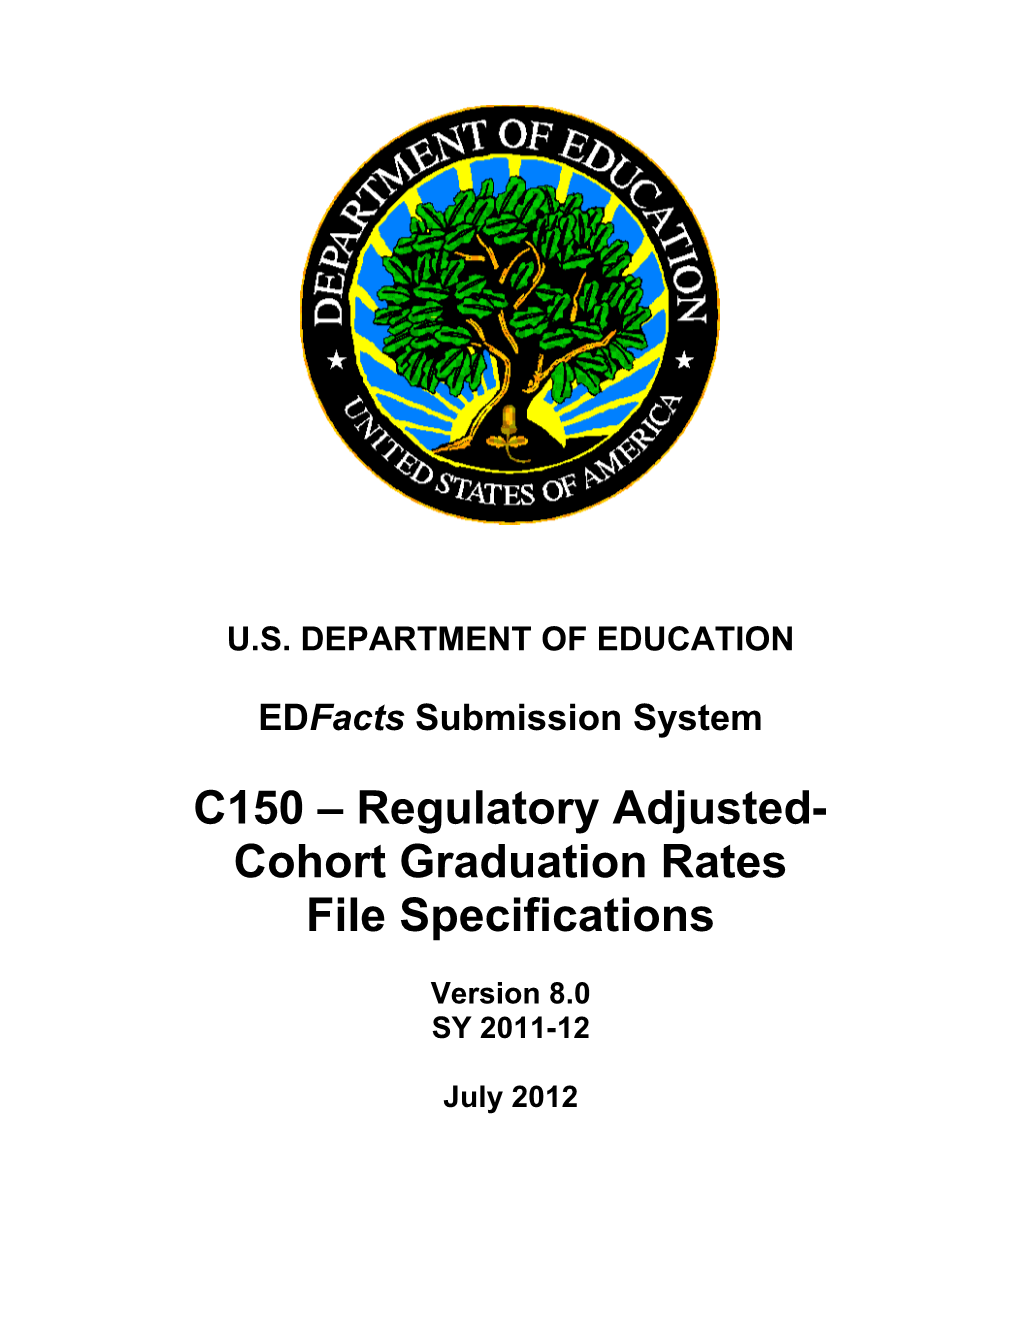 Regulatory Four-Year Adjusted-Cohort Graduation Rate File Specification